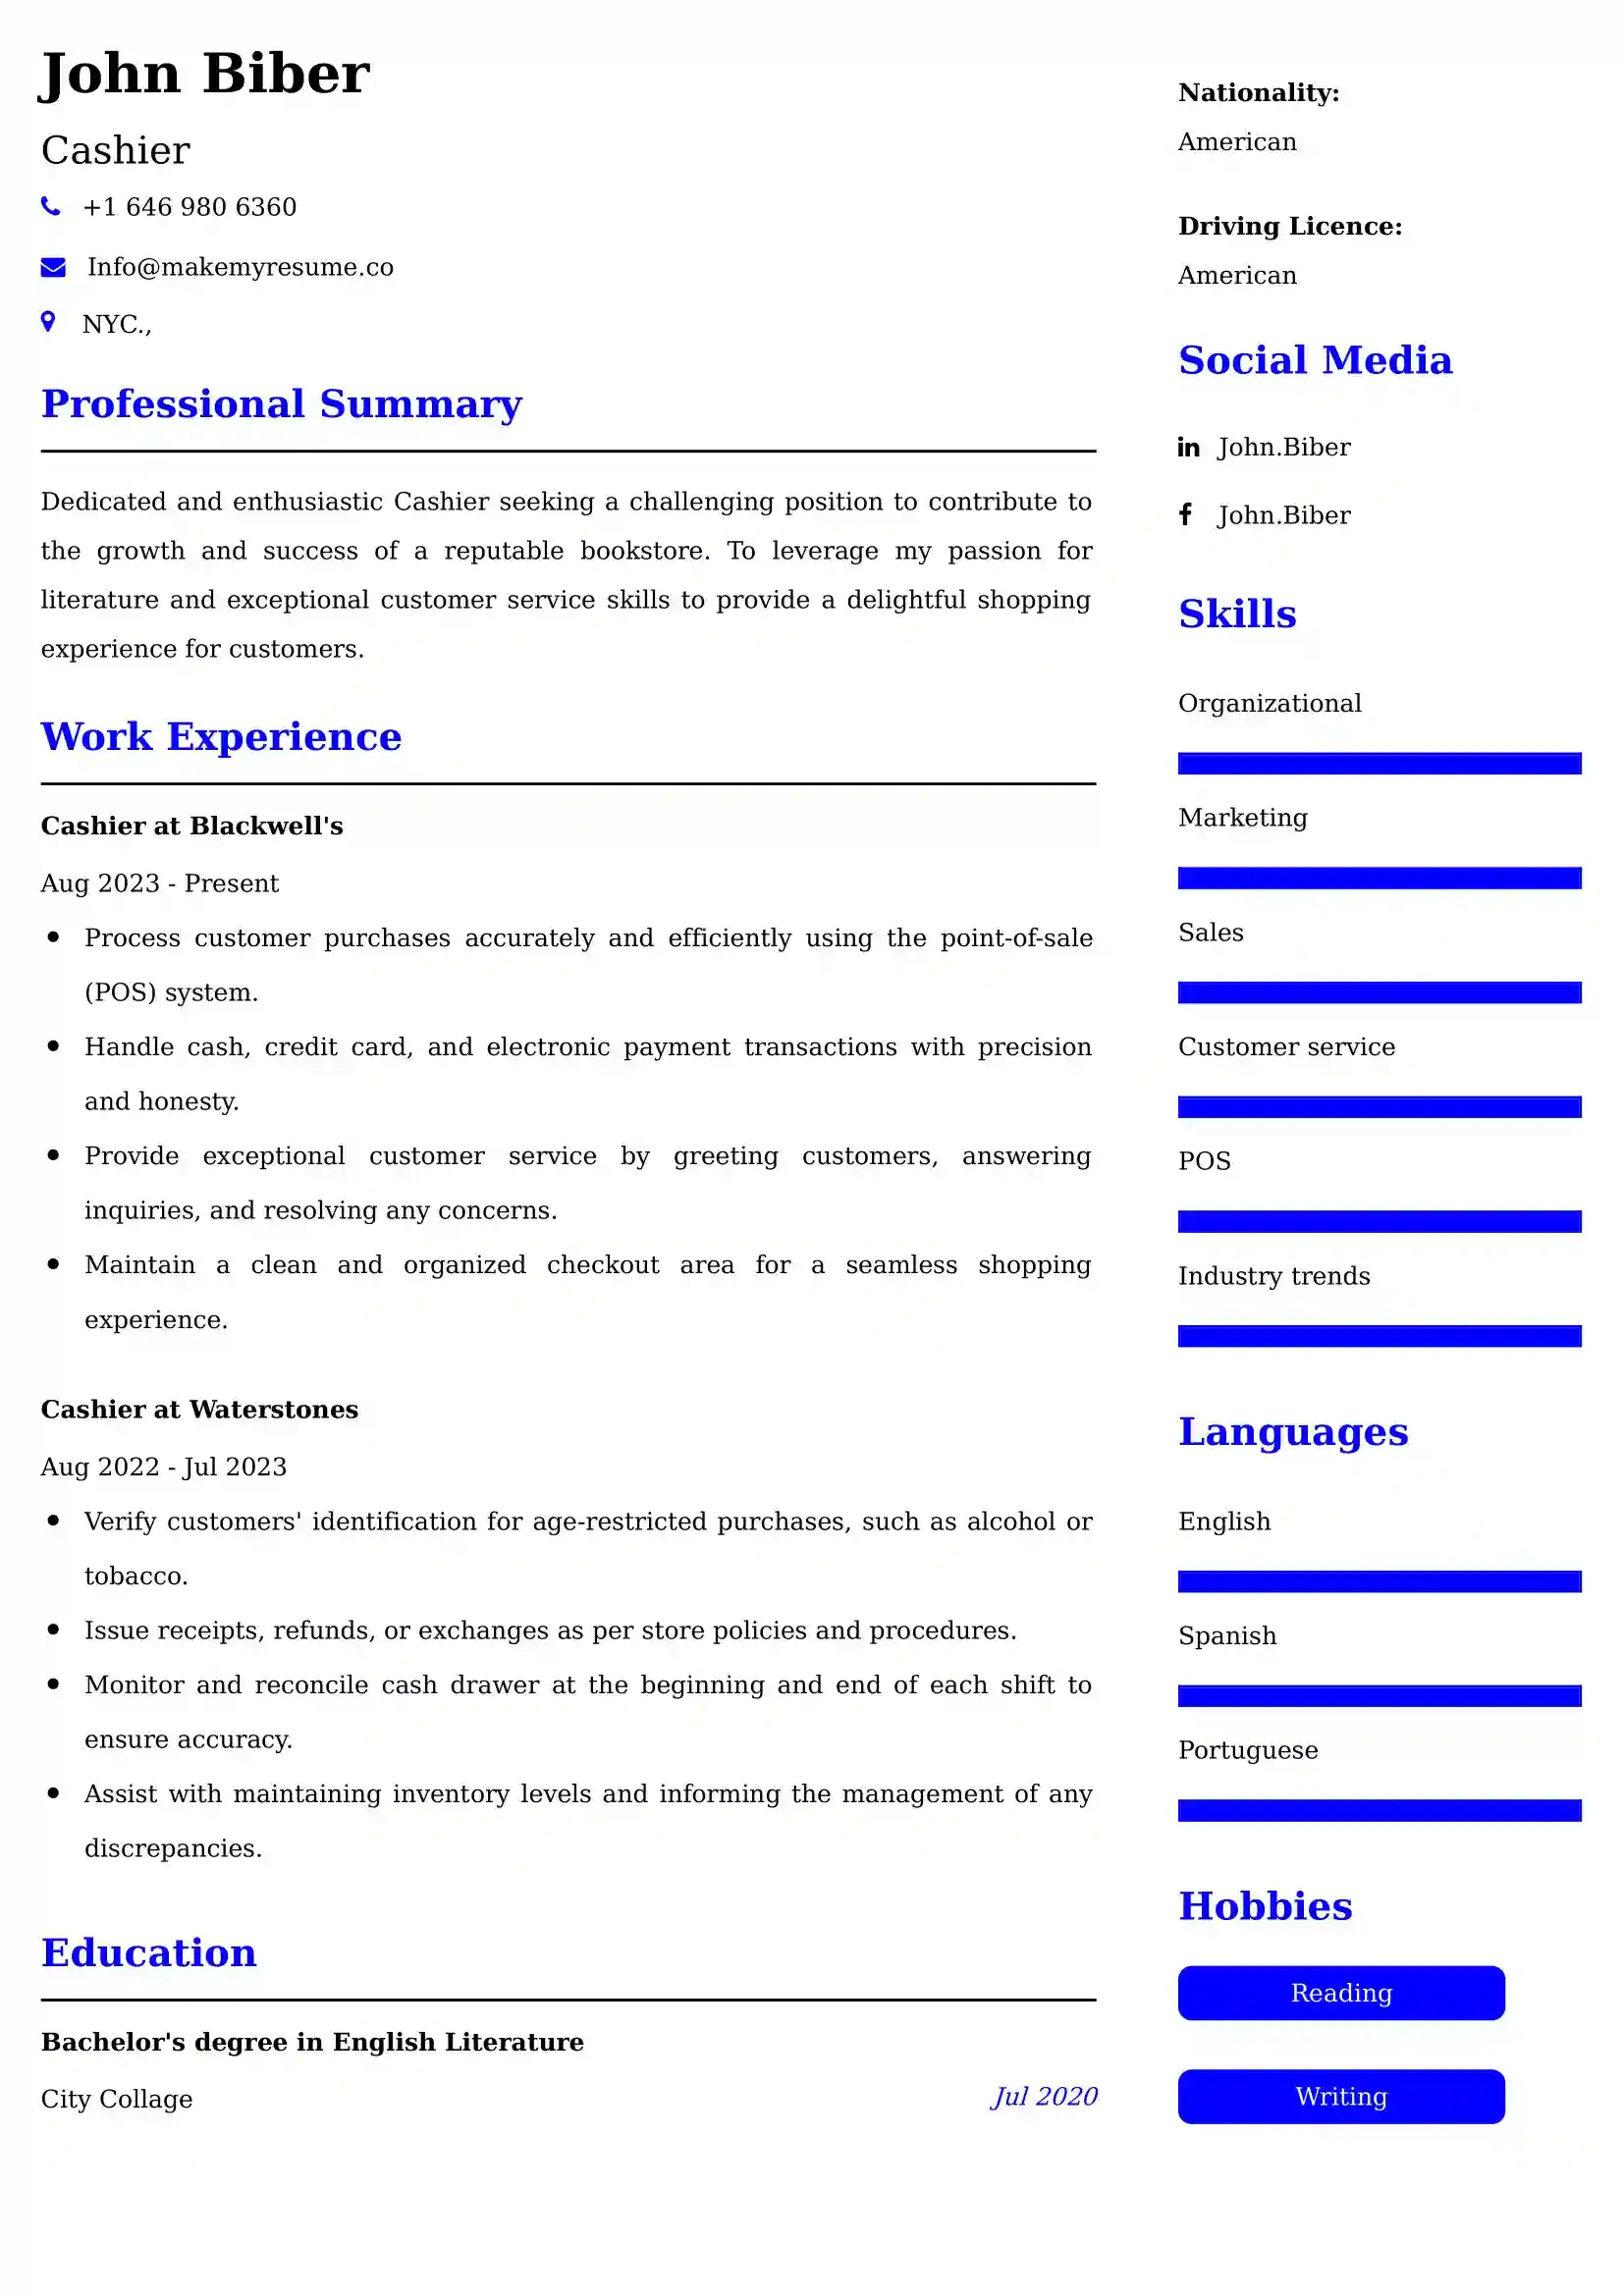 Cashier Resume Examples - UK Format, Latest Template.